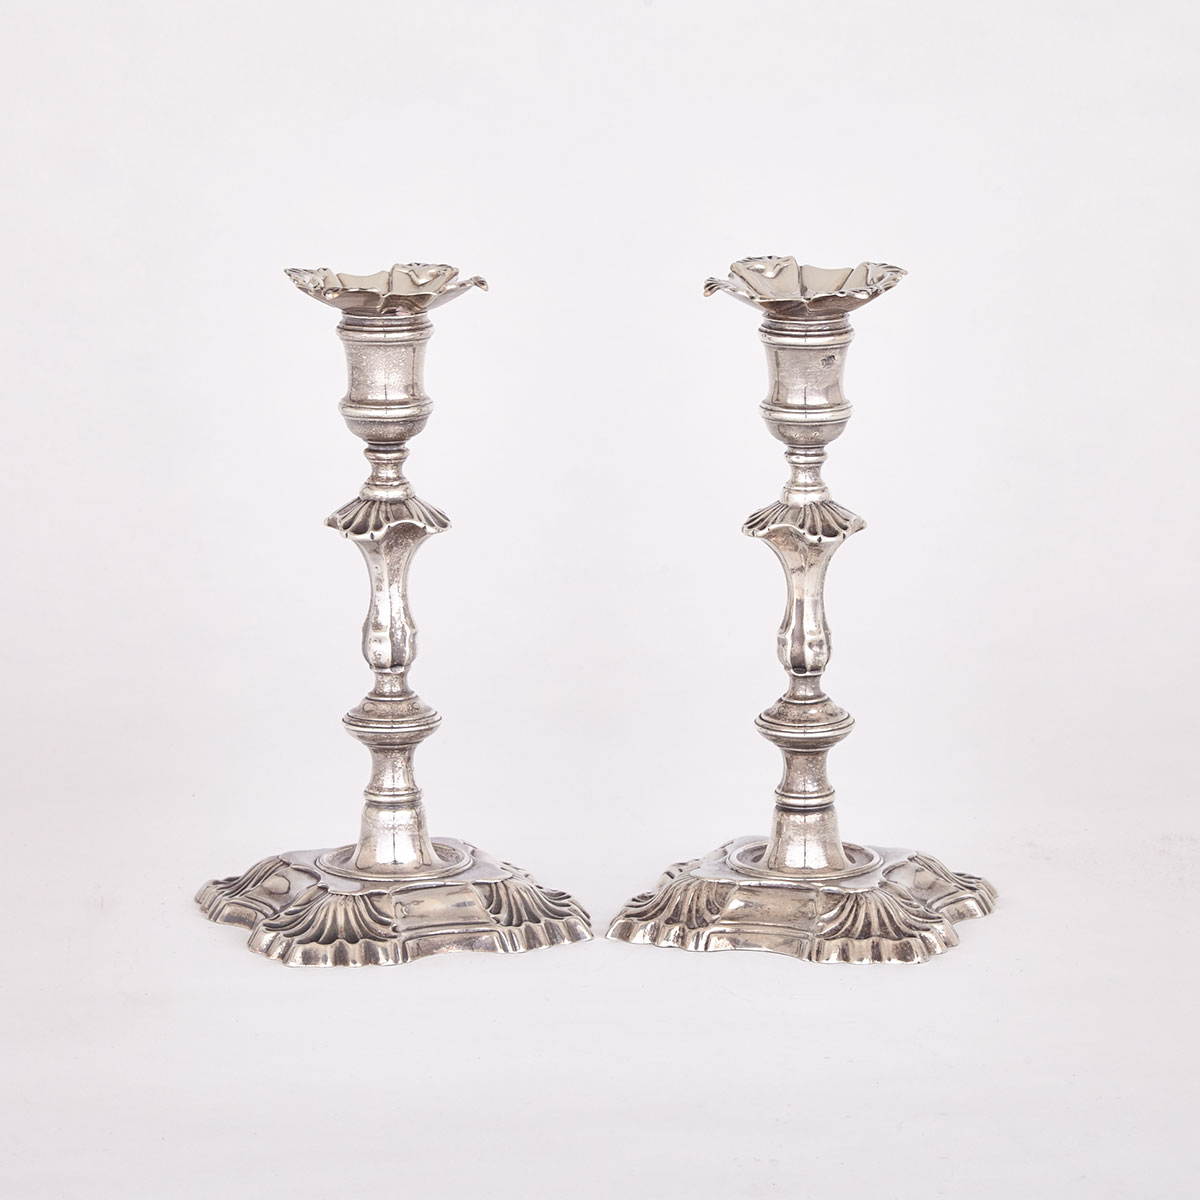 Pair of George II Silver Table Candlesticks,  William Gould, London, 1750